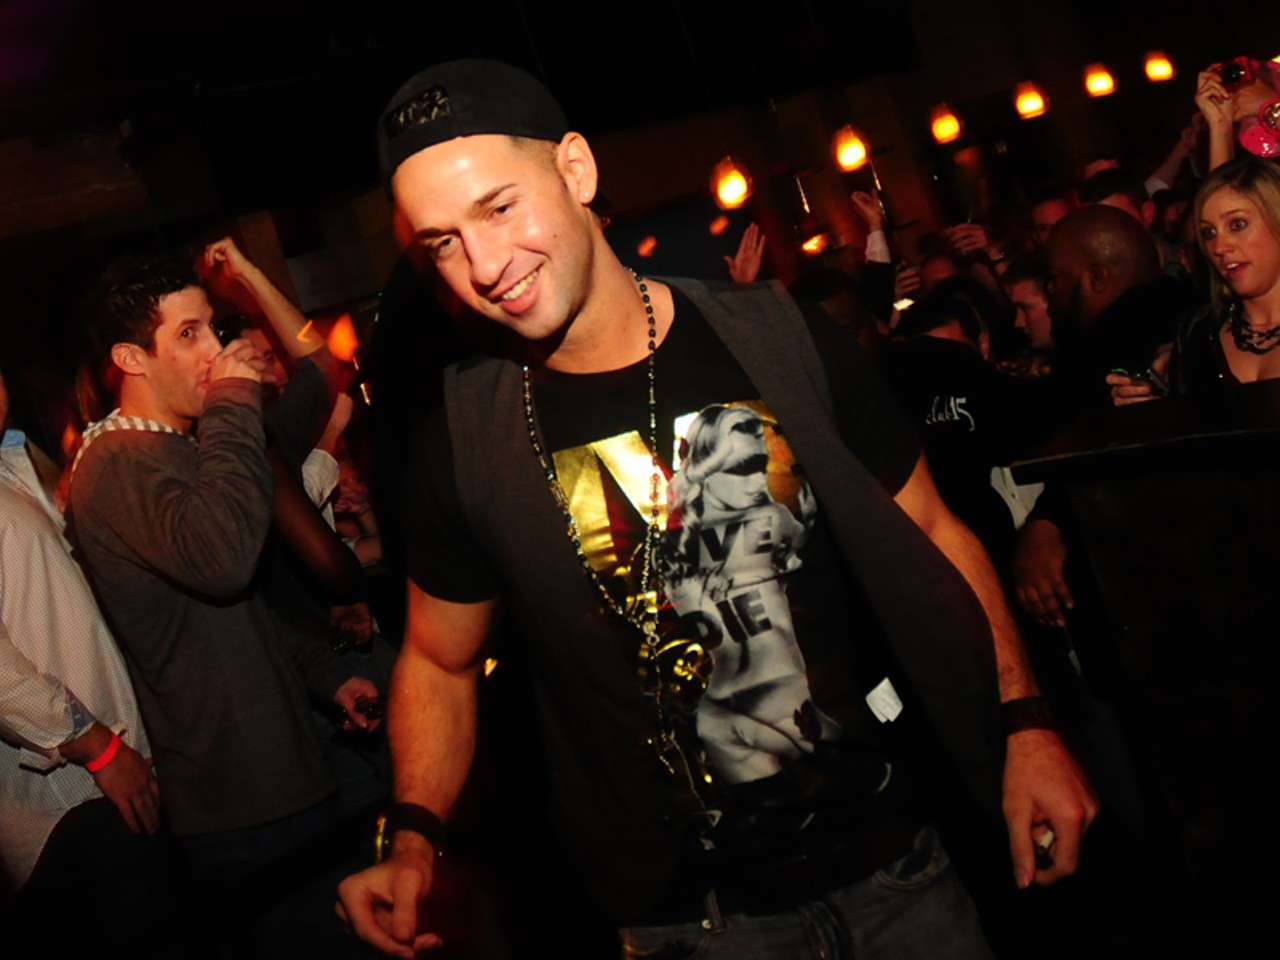 Jersey Shore's "The Situation" at Club F15teen, 1/23/10